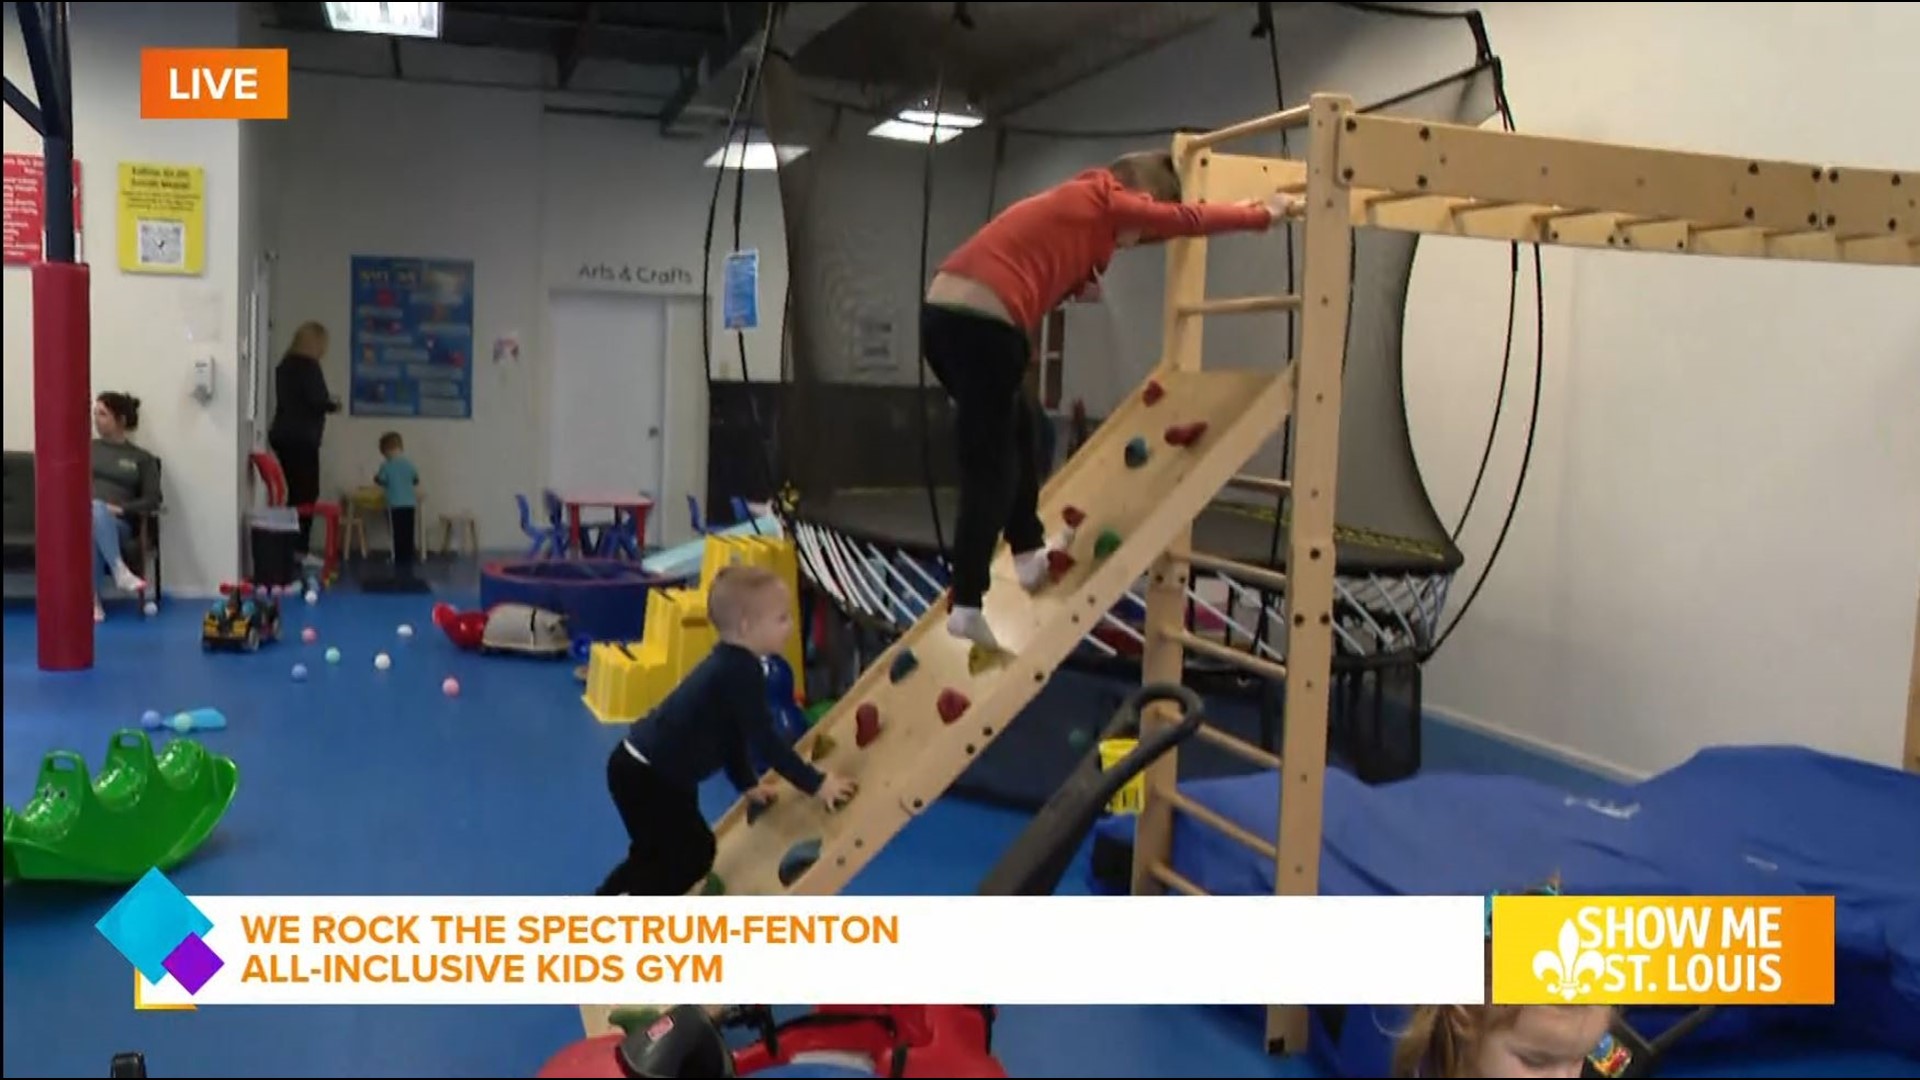 They are a fun, enriching environment that includes swings, a trampoline, pretend play, sensory bins, an arts & crafts corner, an interactive projector, and more.